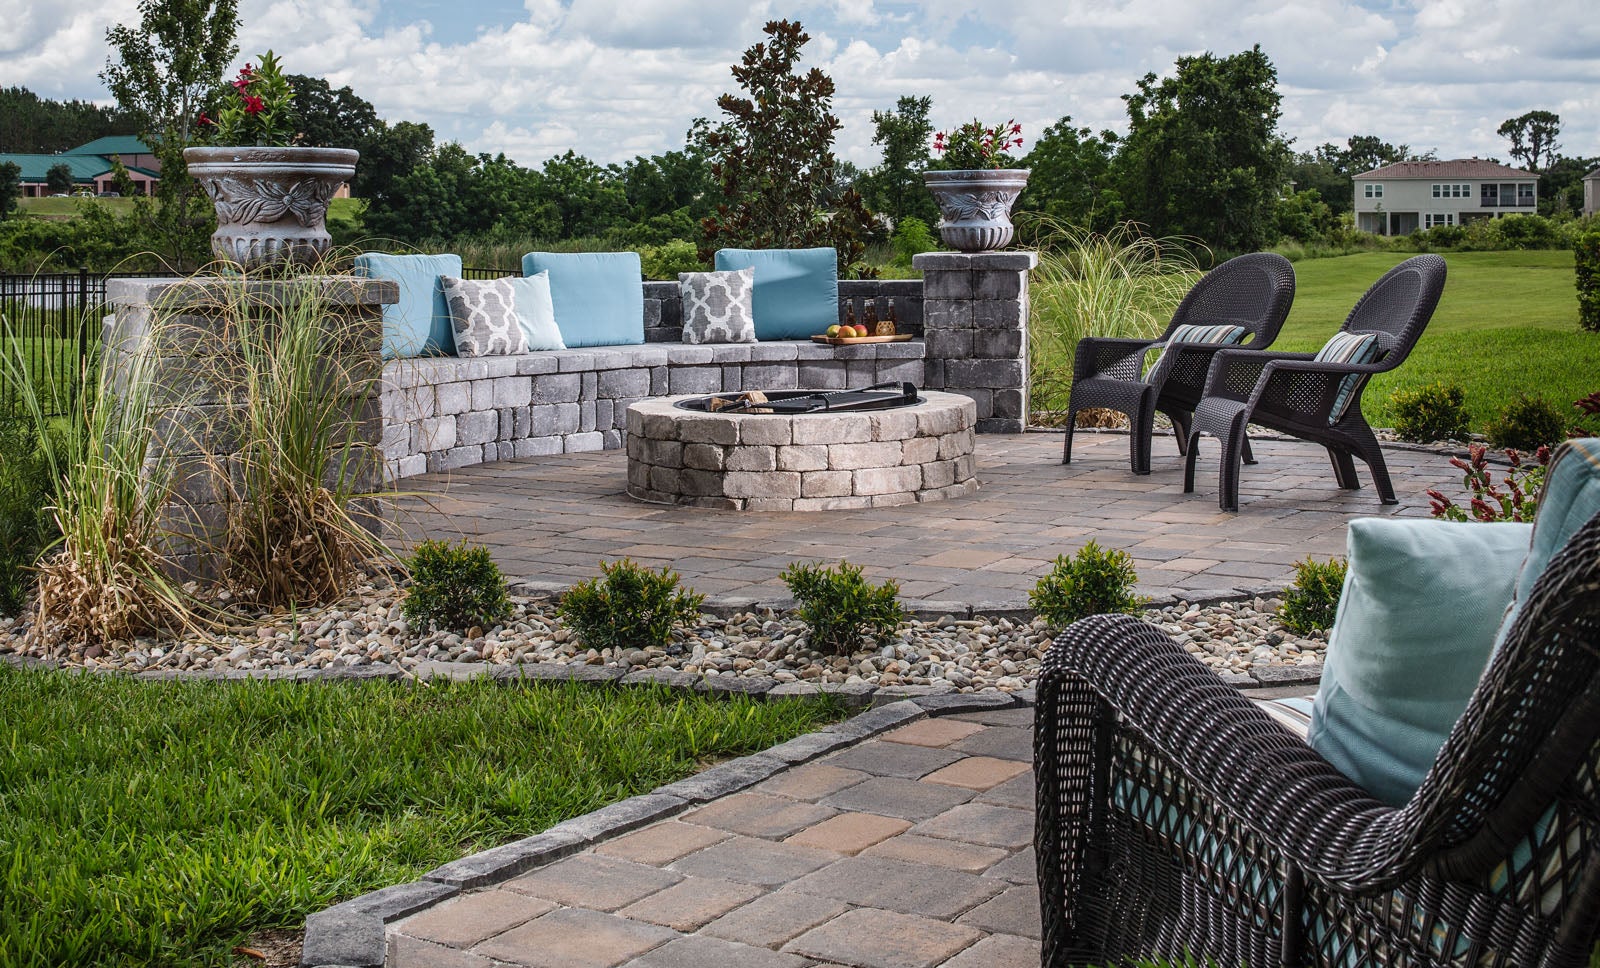 Seat Wall Design: Patio Seating Walls & Fire Pit Ideas From Belgard